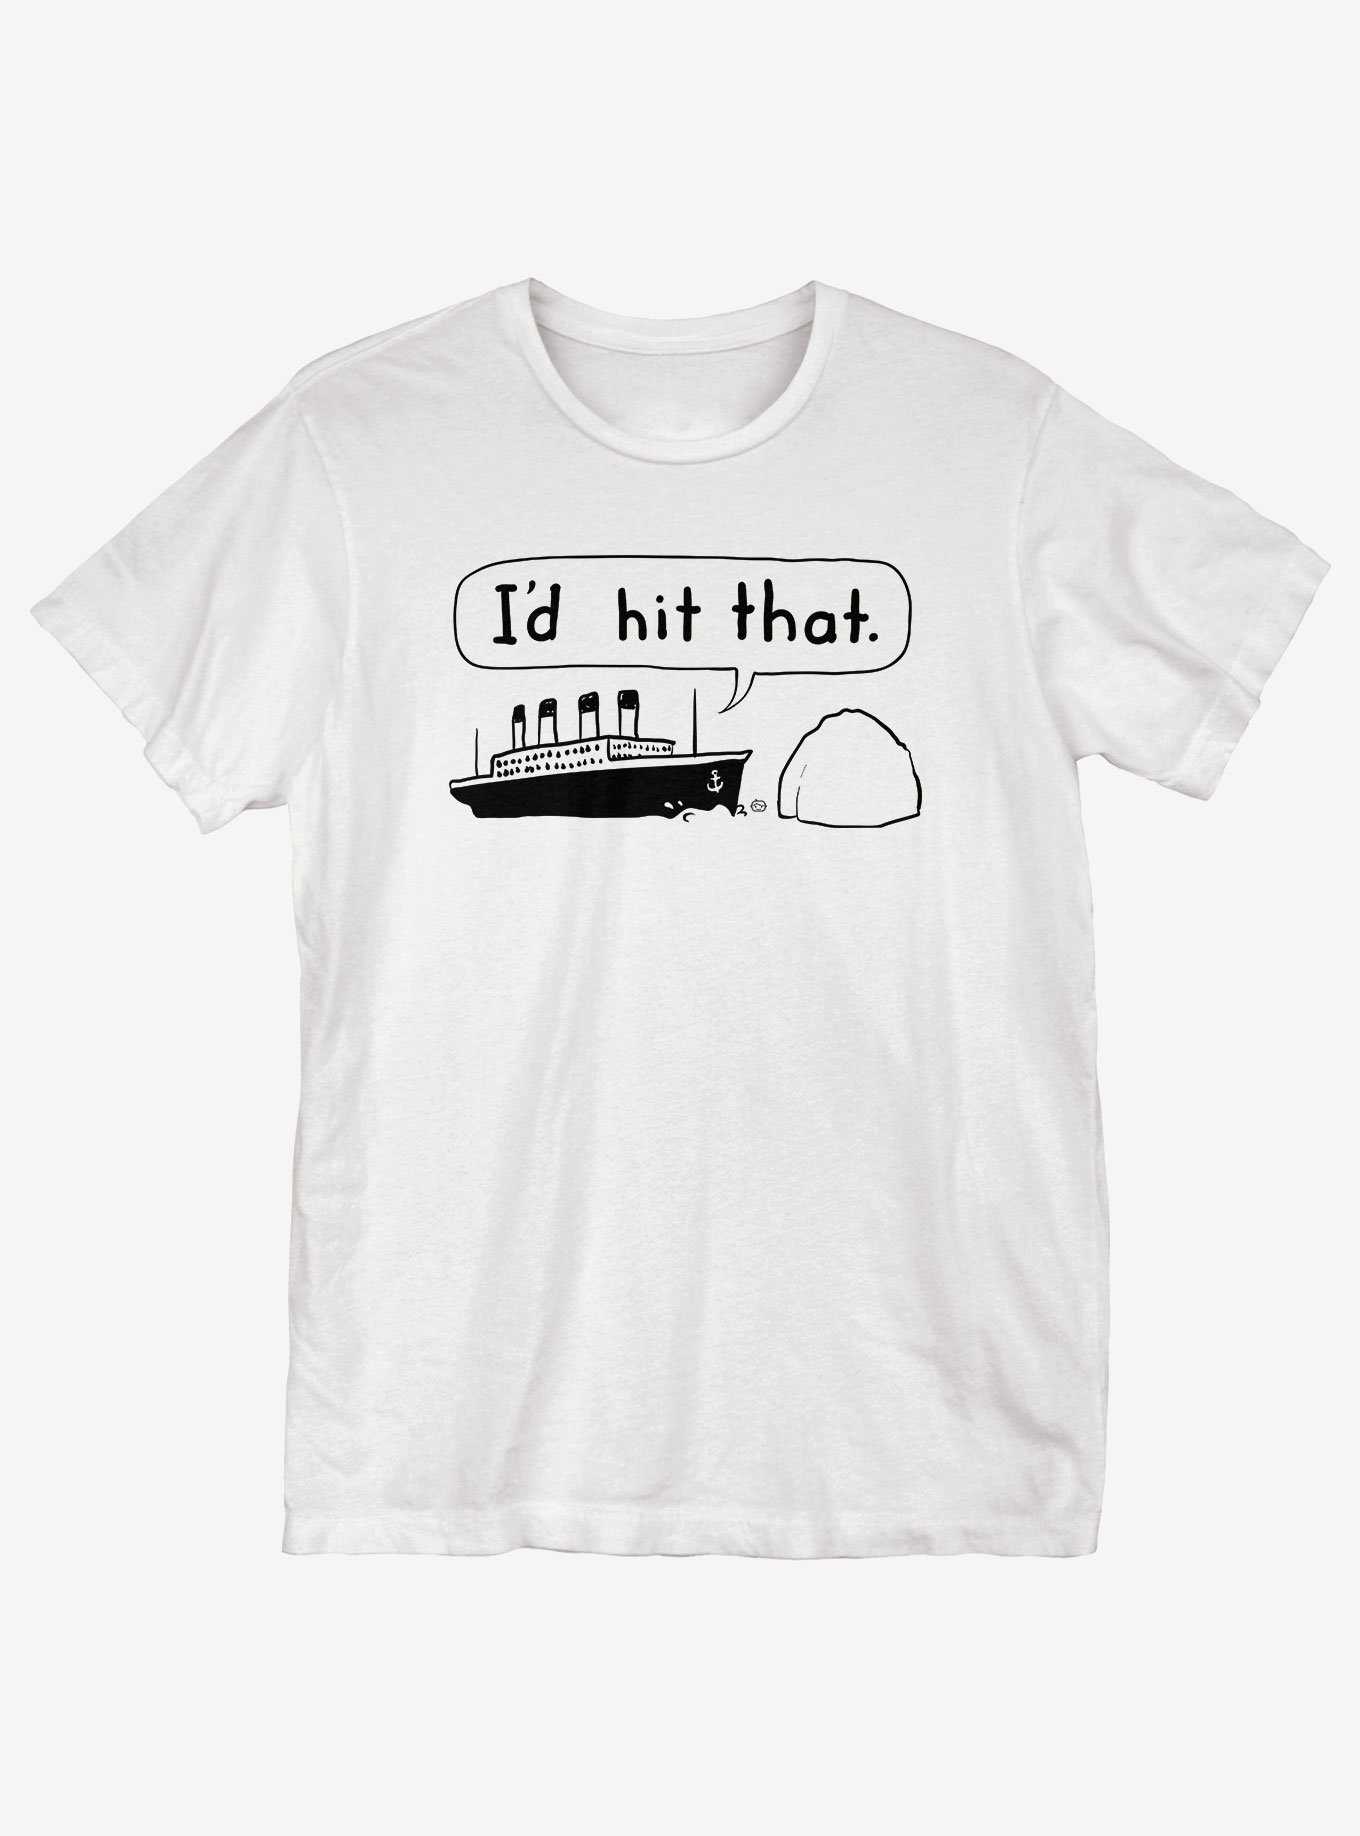 Hello Kitty T-shirt Humour The Boat People, T-shirt, white, text, joke png